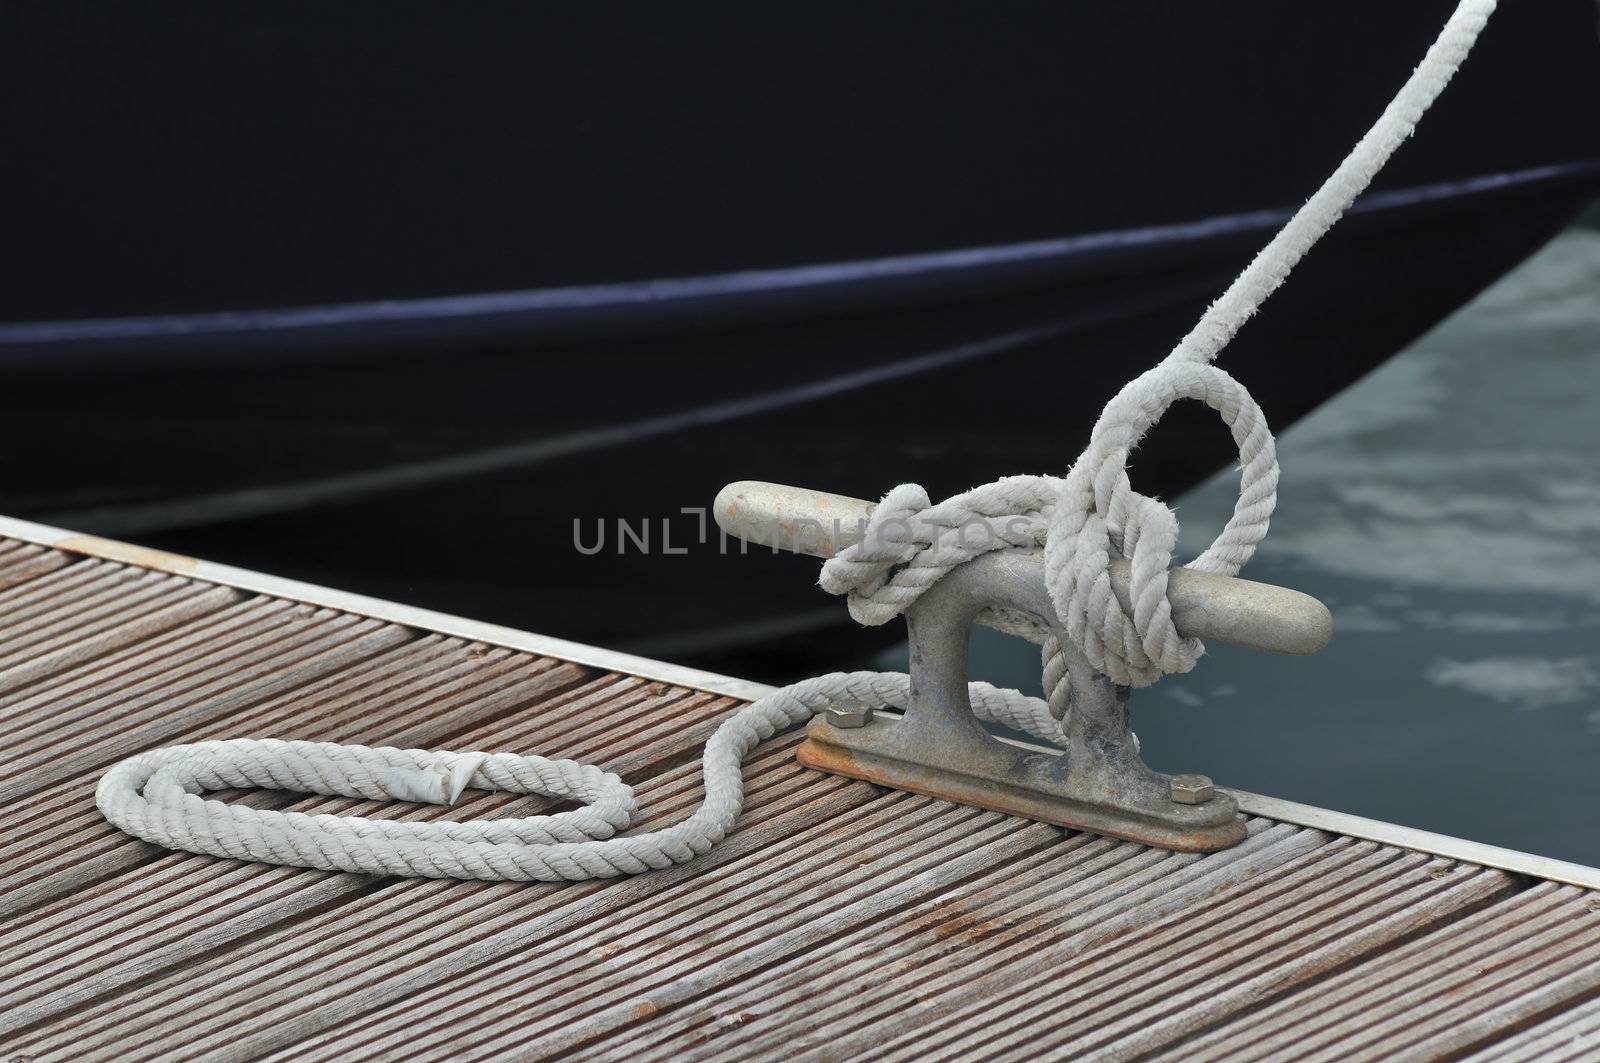 Detail of a rope tied up to bitt of a jetty